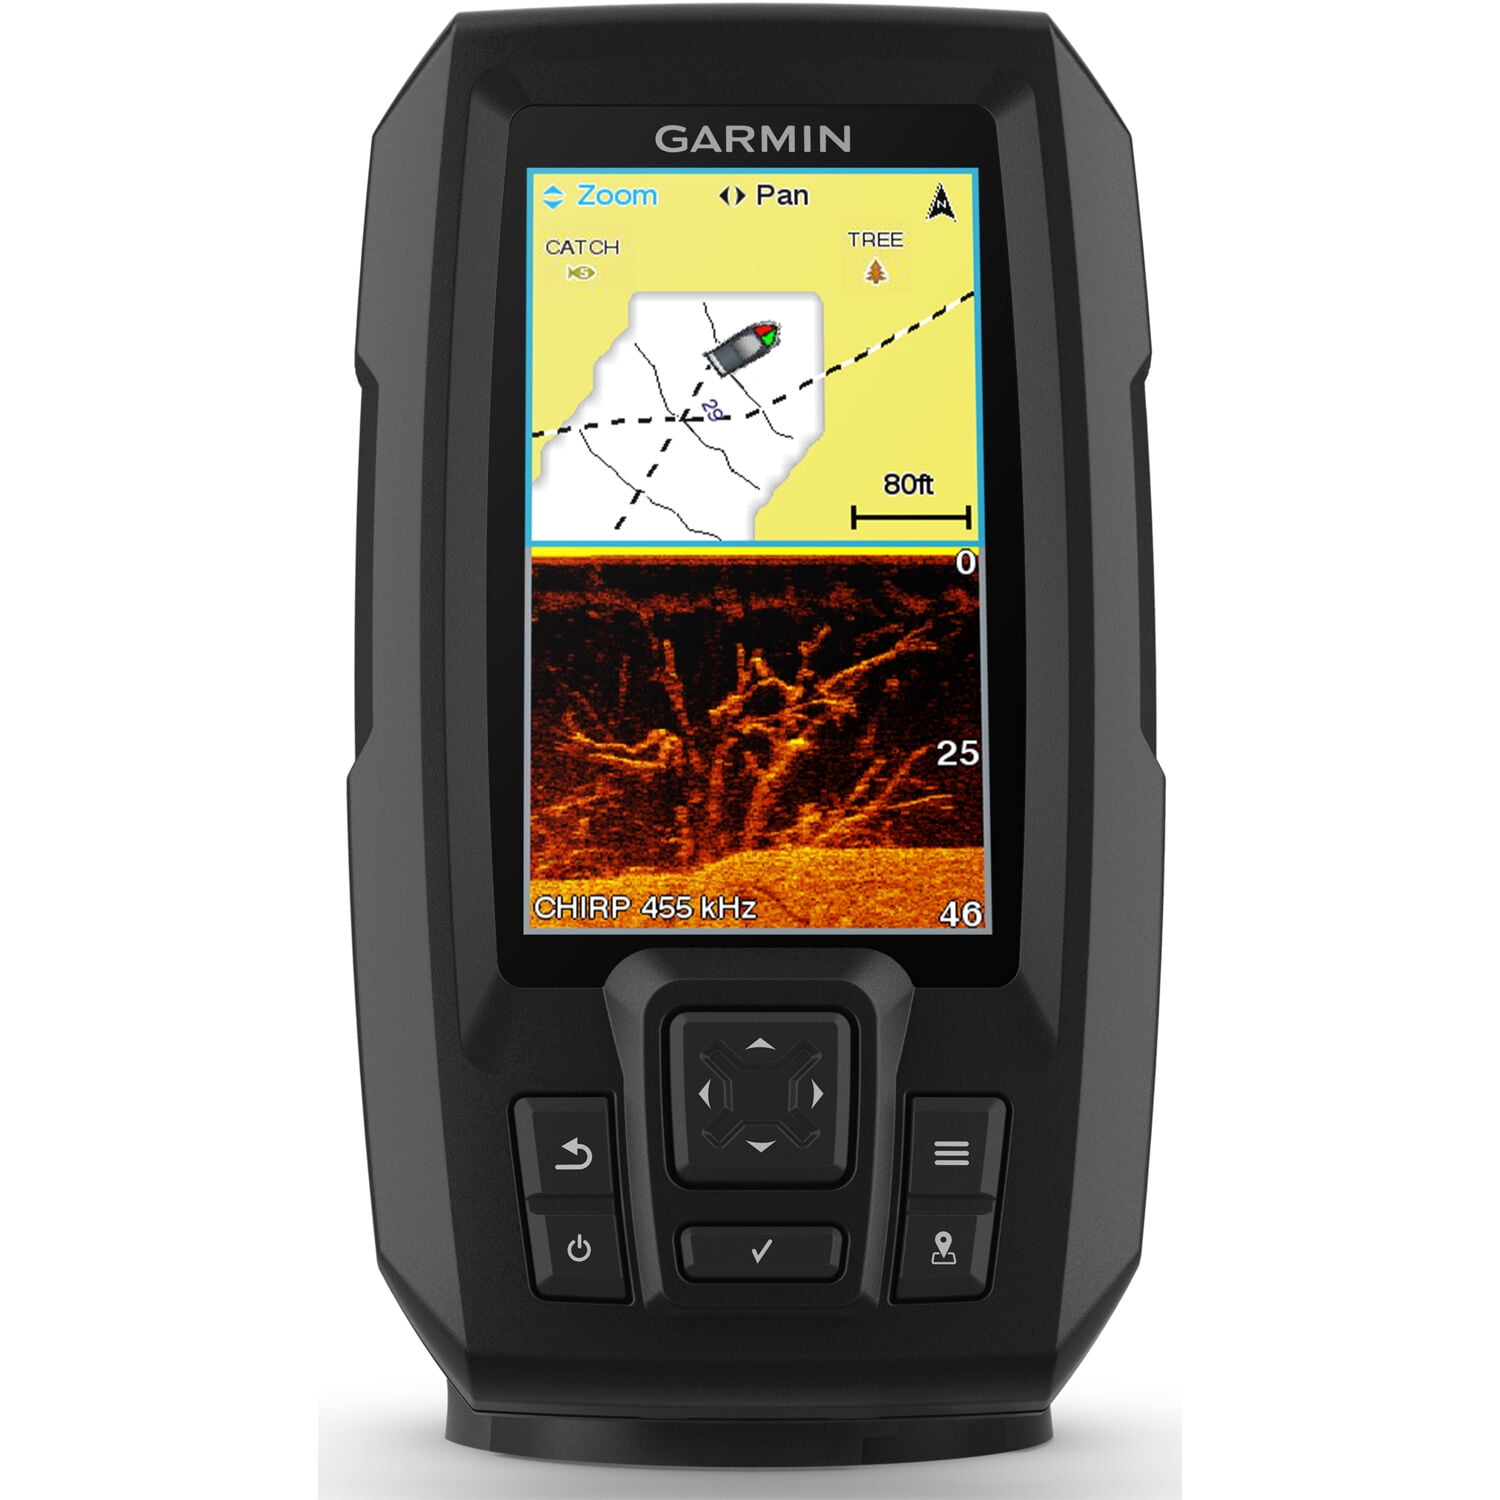 Garmin 010-12441-00 Protective Cover for sale online 